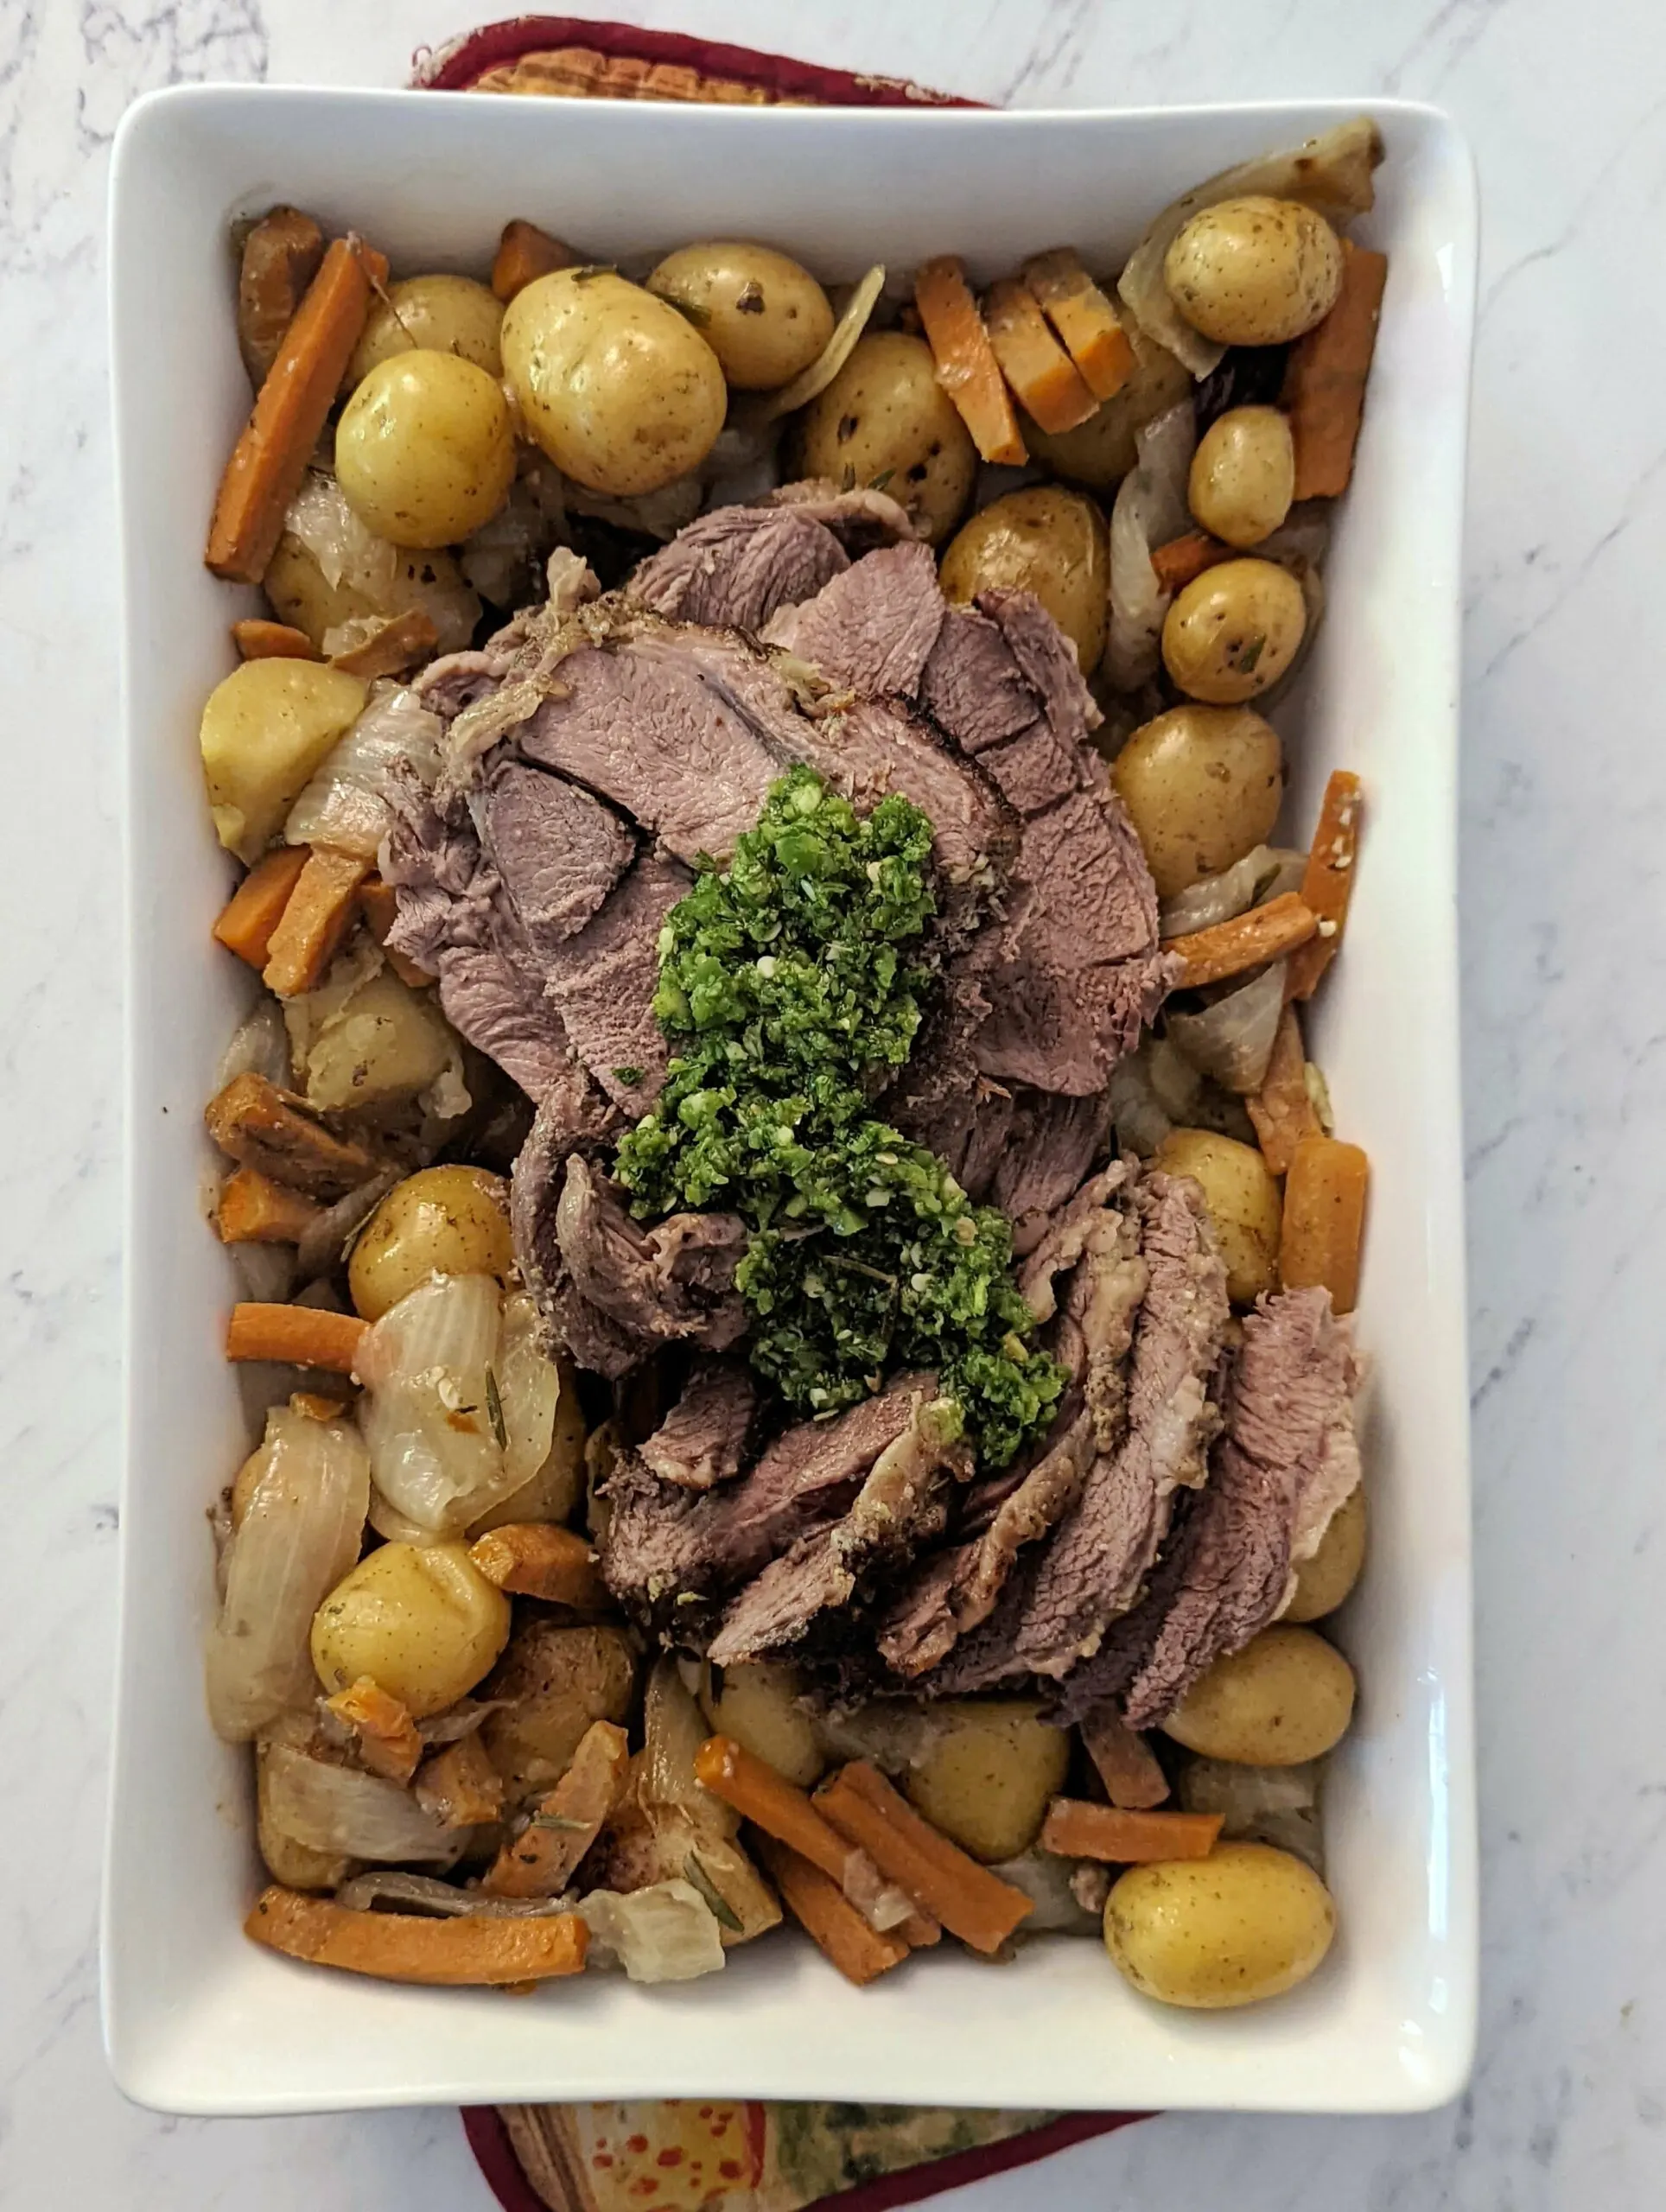 Sliced boneless leg of lamb roast in a serving dish with potatoes and carrots and garnished with skhug.